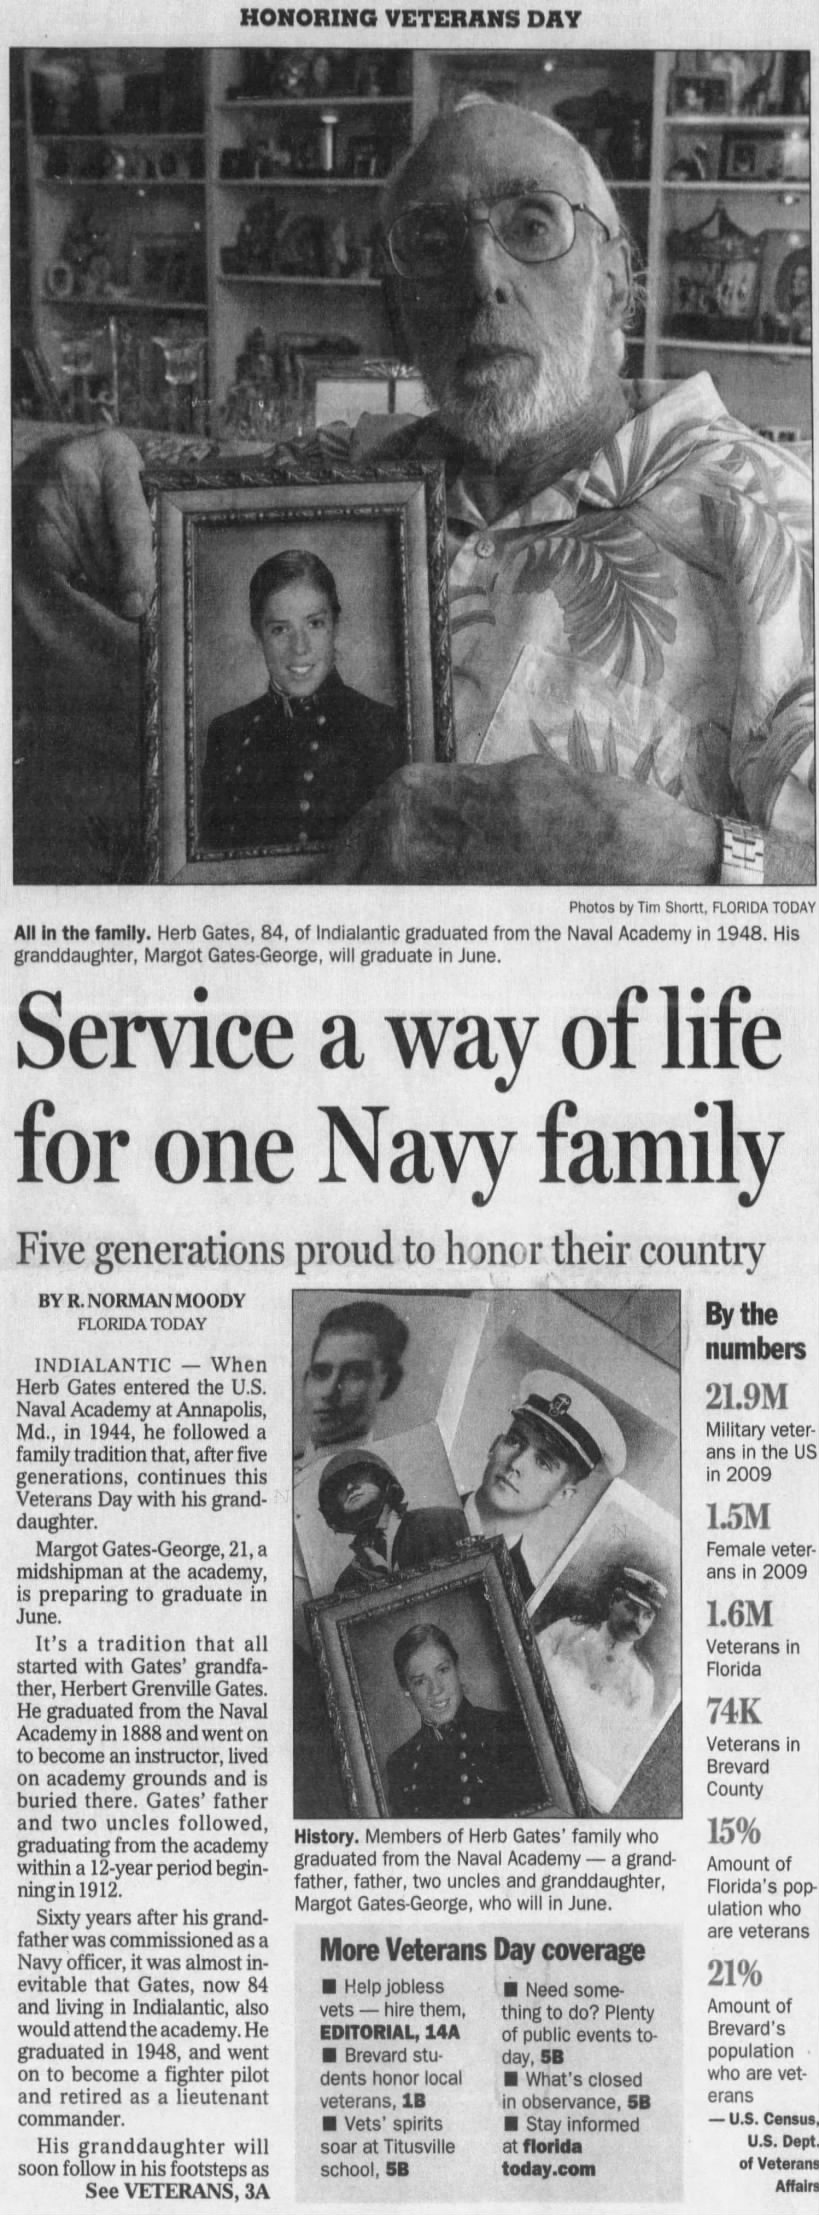 Service a way of life for one Navy family